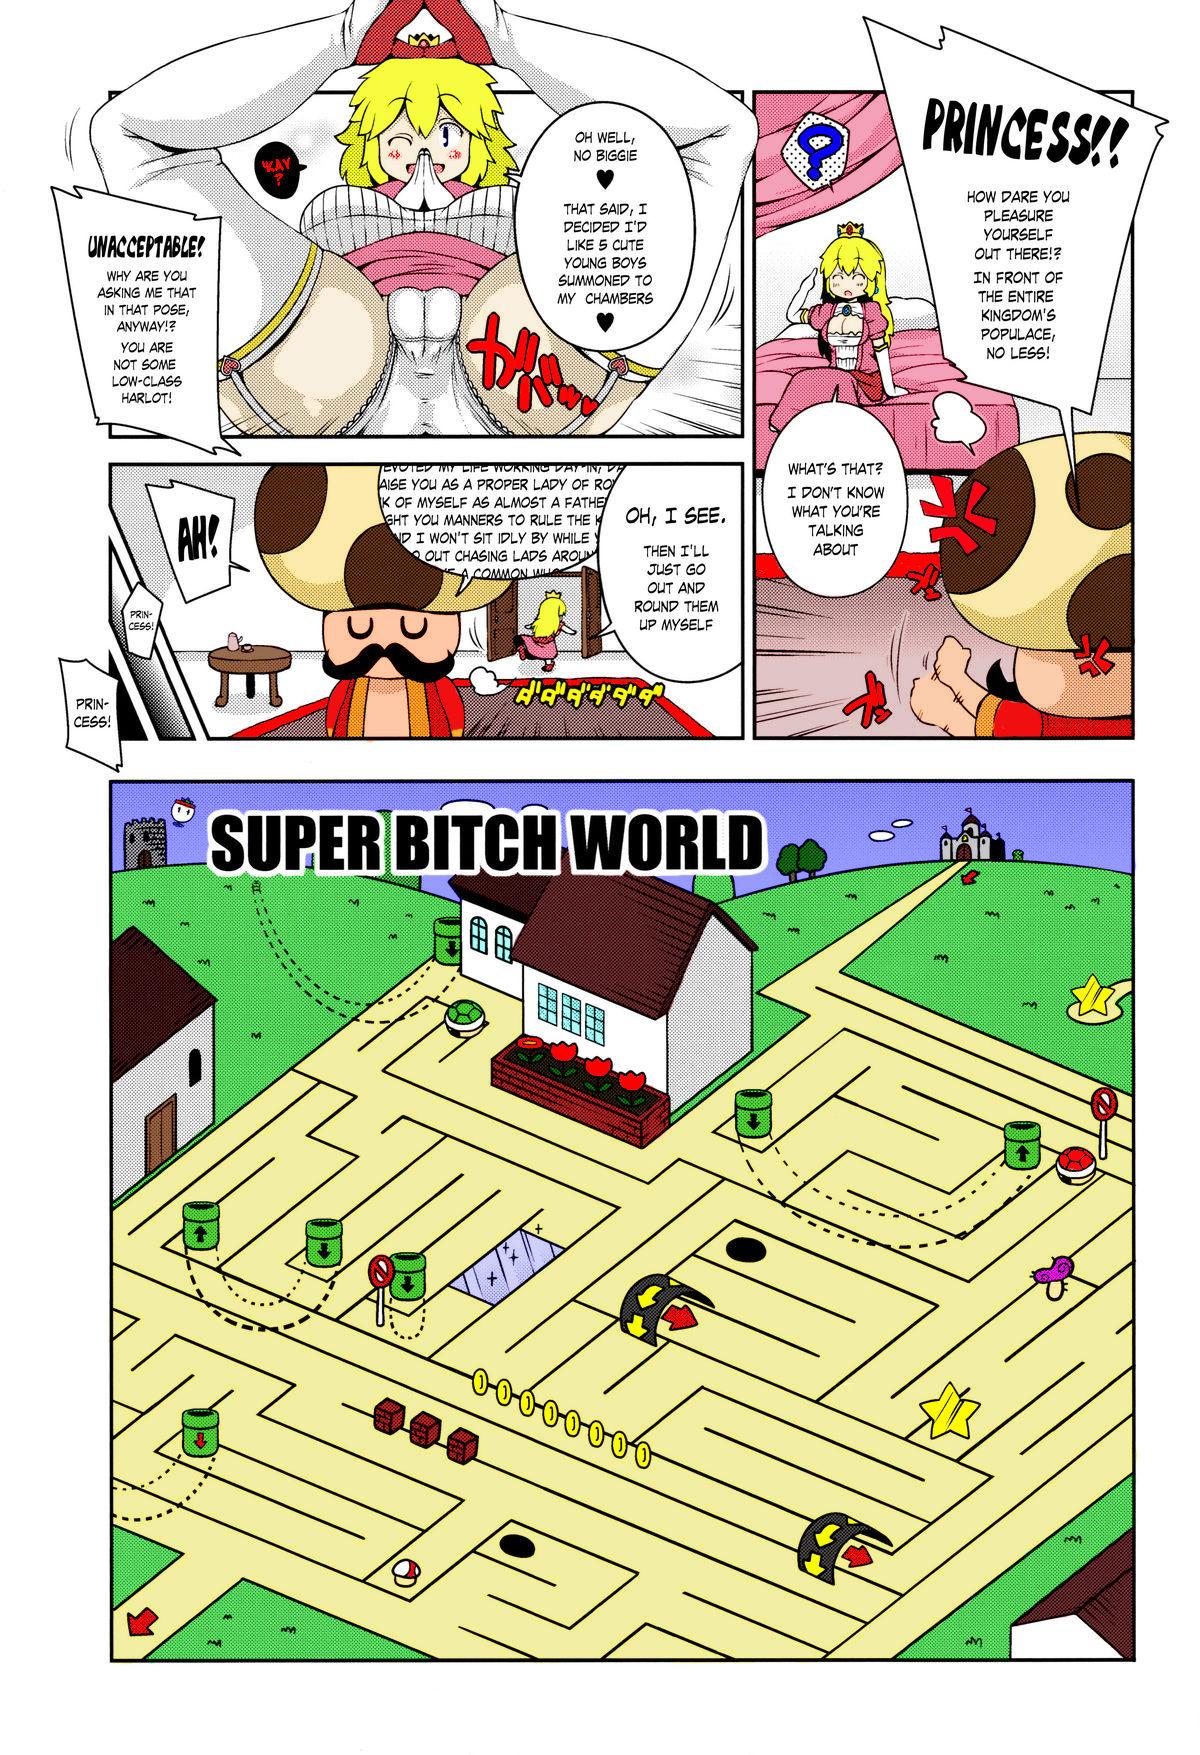 Stepdad SUPER BITCH WORLD - Super mario brothers Young Petite Porn - Page 6